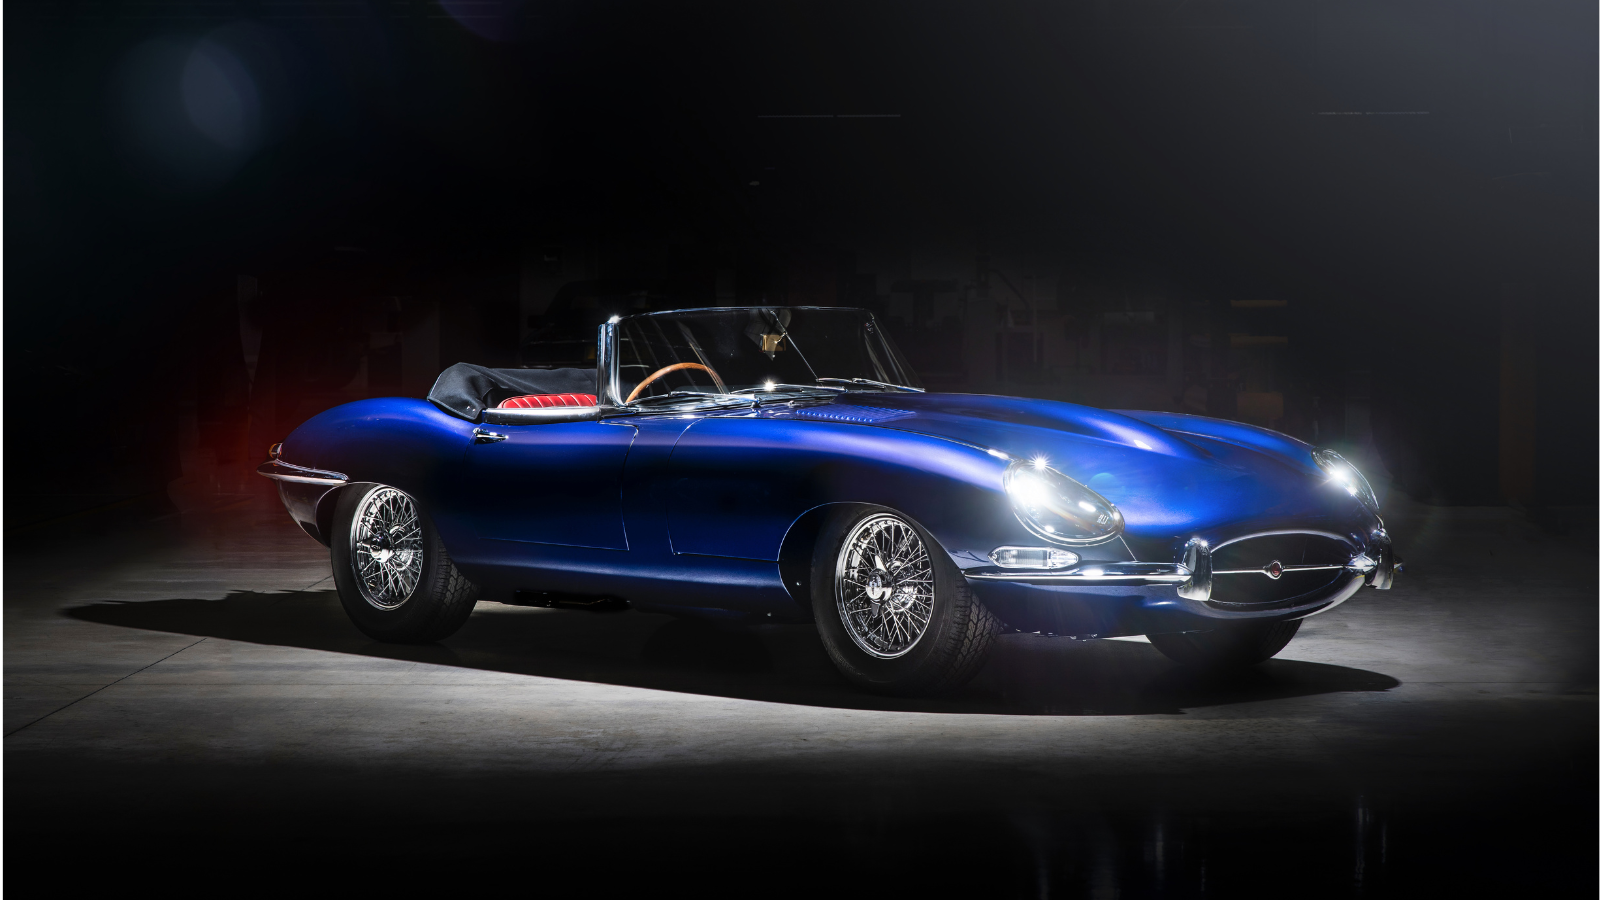 ONE-OFF JAGUAR CLASSIC E-TYPE DEBUTS AT THE QUEEN’S PLATINUM JUBILEE PAGEANT